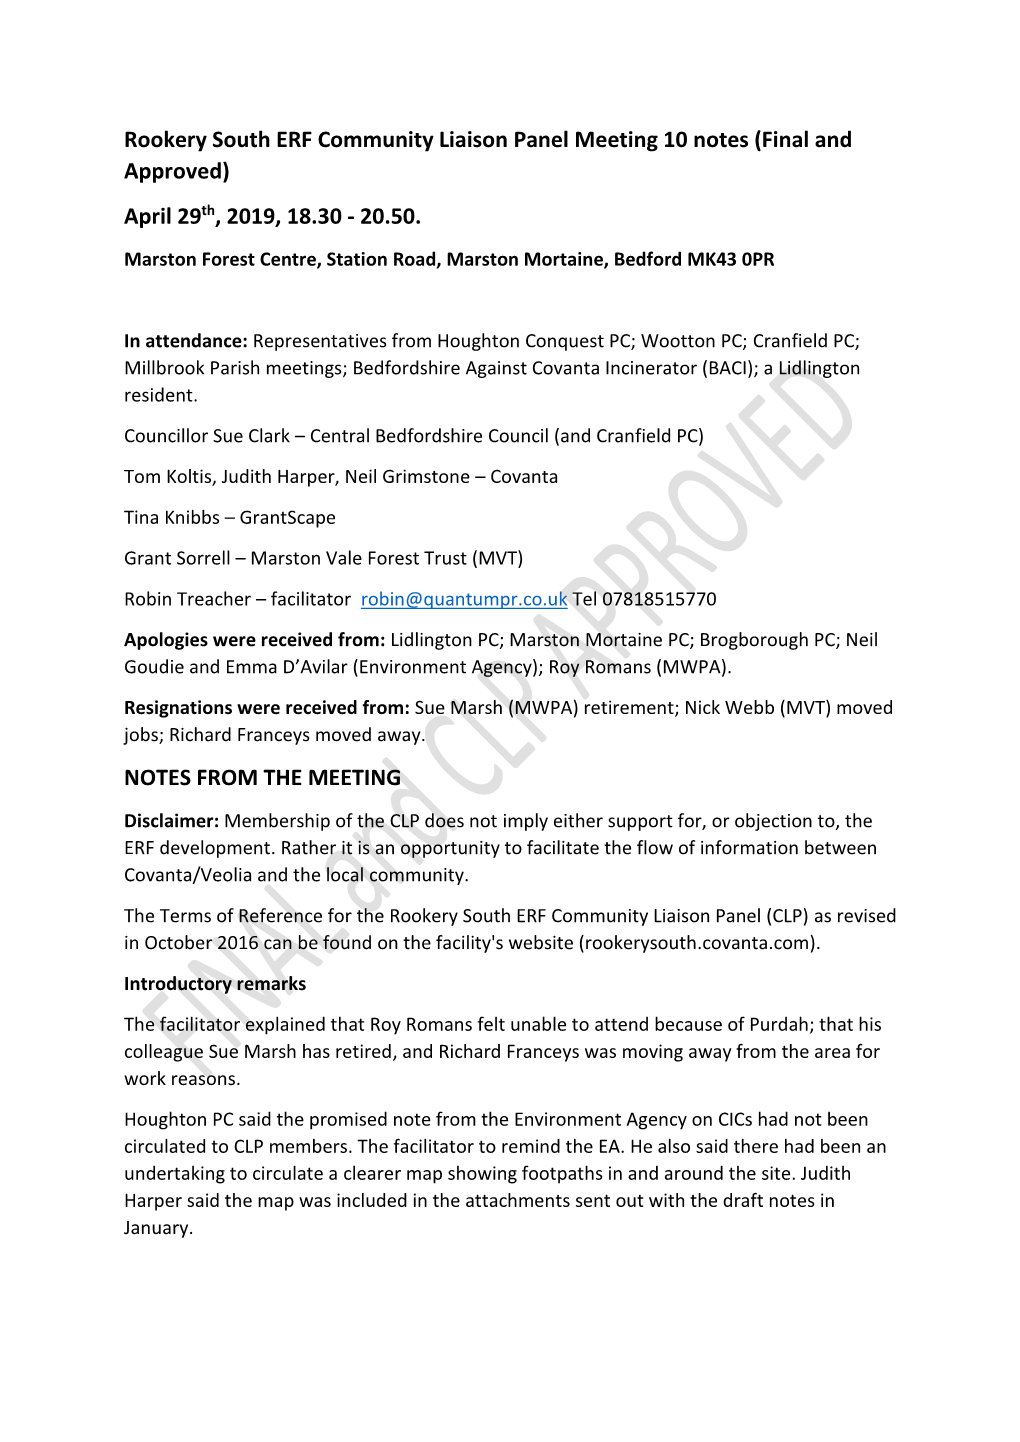 Rookery South ERF Community Liaison Panel Meeting 10 Notes (Final and Approved) April 29Th, 2019, 18.30 - 20.50